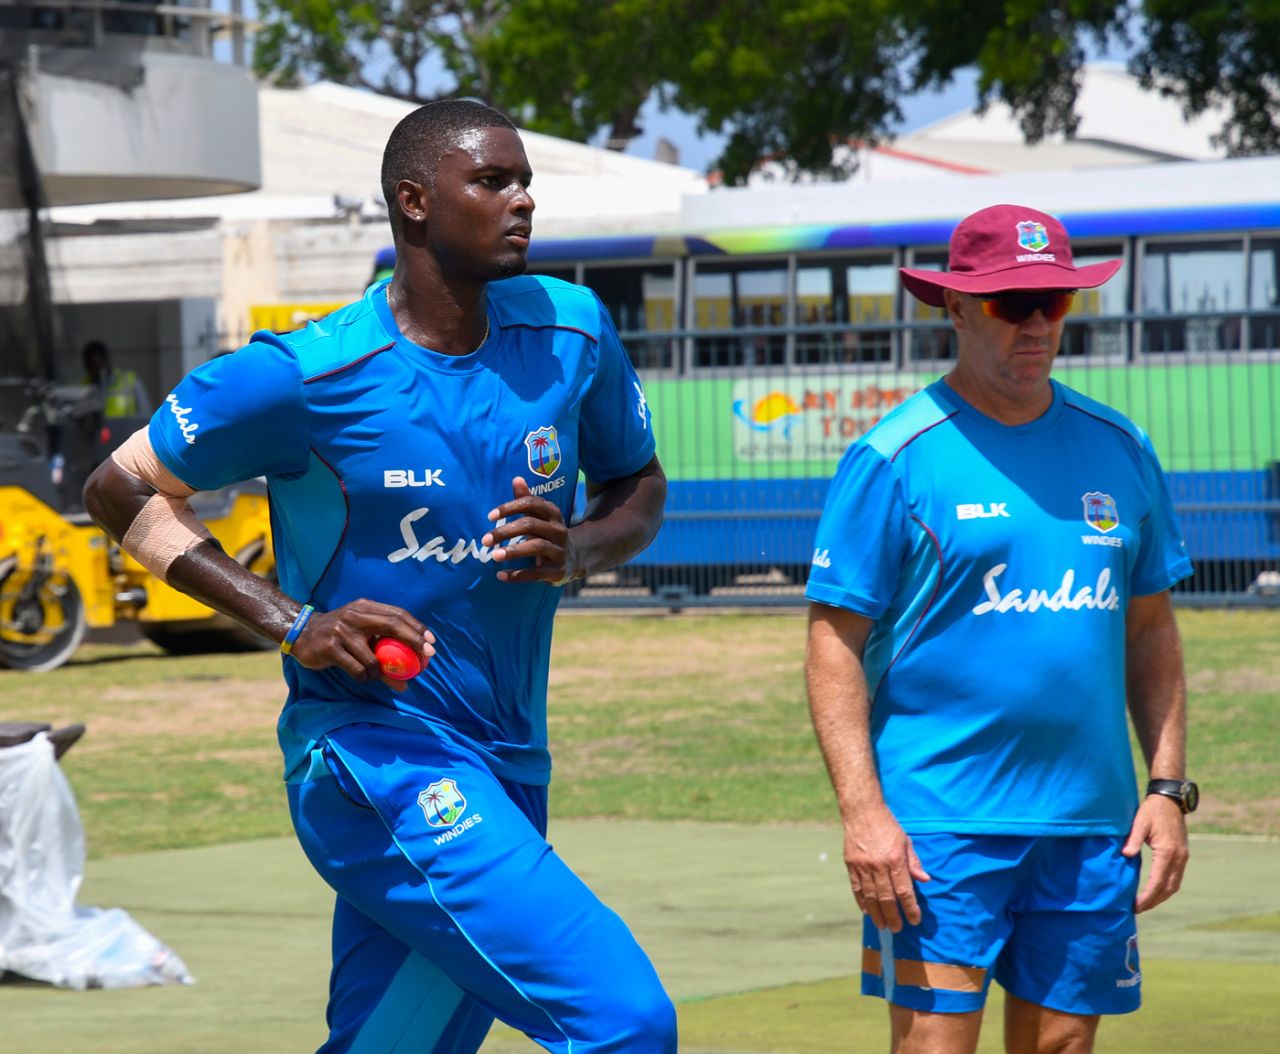 Jason Holder takes part in a training session with Stuart Law by his side, West Indies v Sri Lanka, 3rd Test, Barbados, June 22, 2018